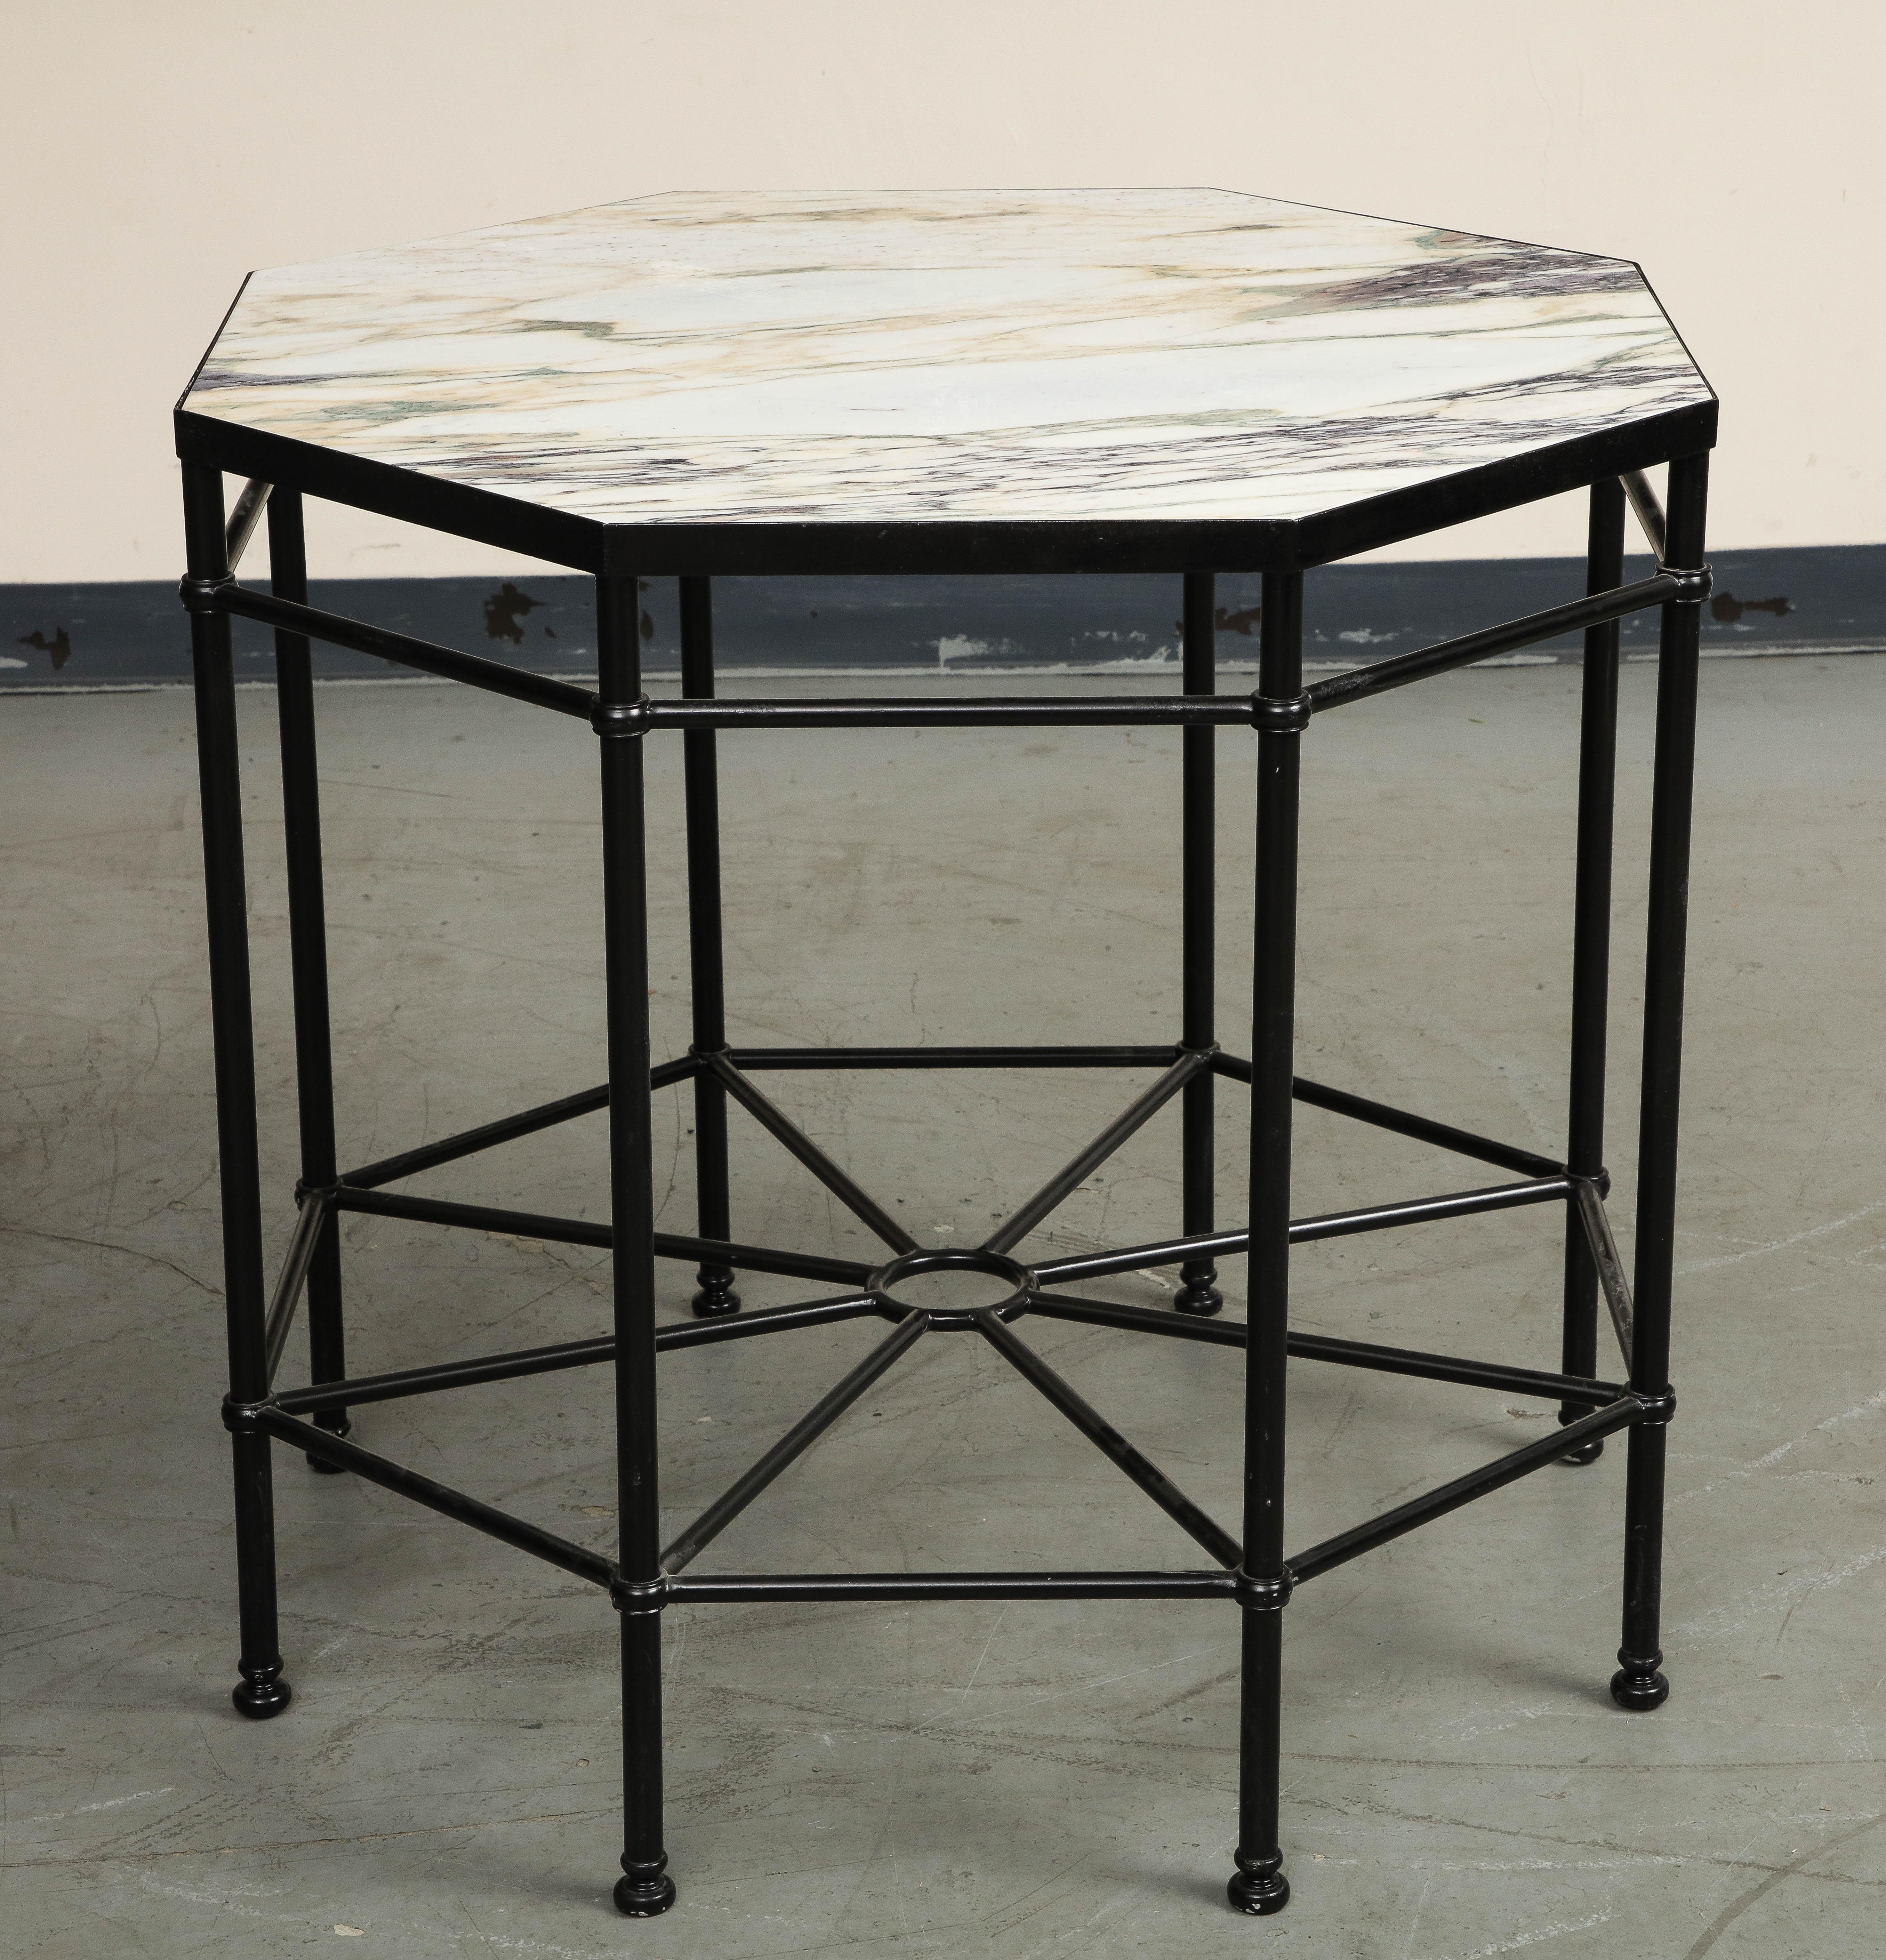 Modern 20th Century Octagonal Black Painted Steel Table with New Violetta Marble Top